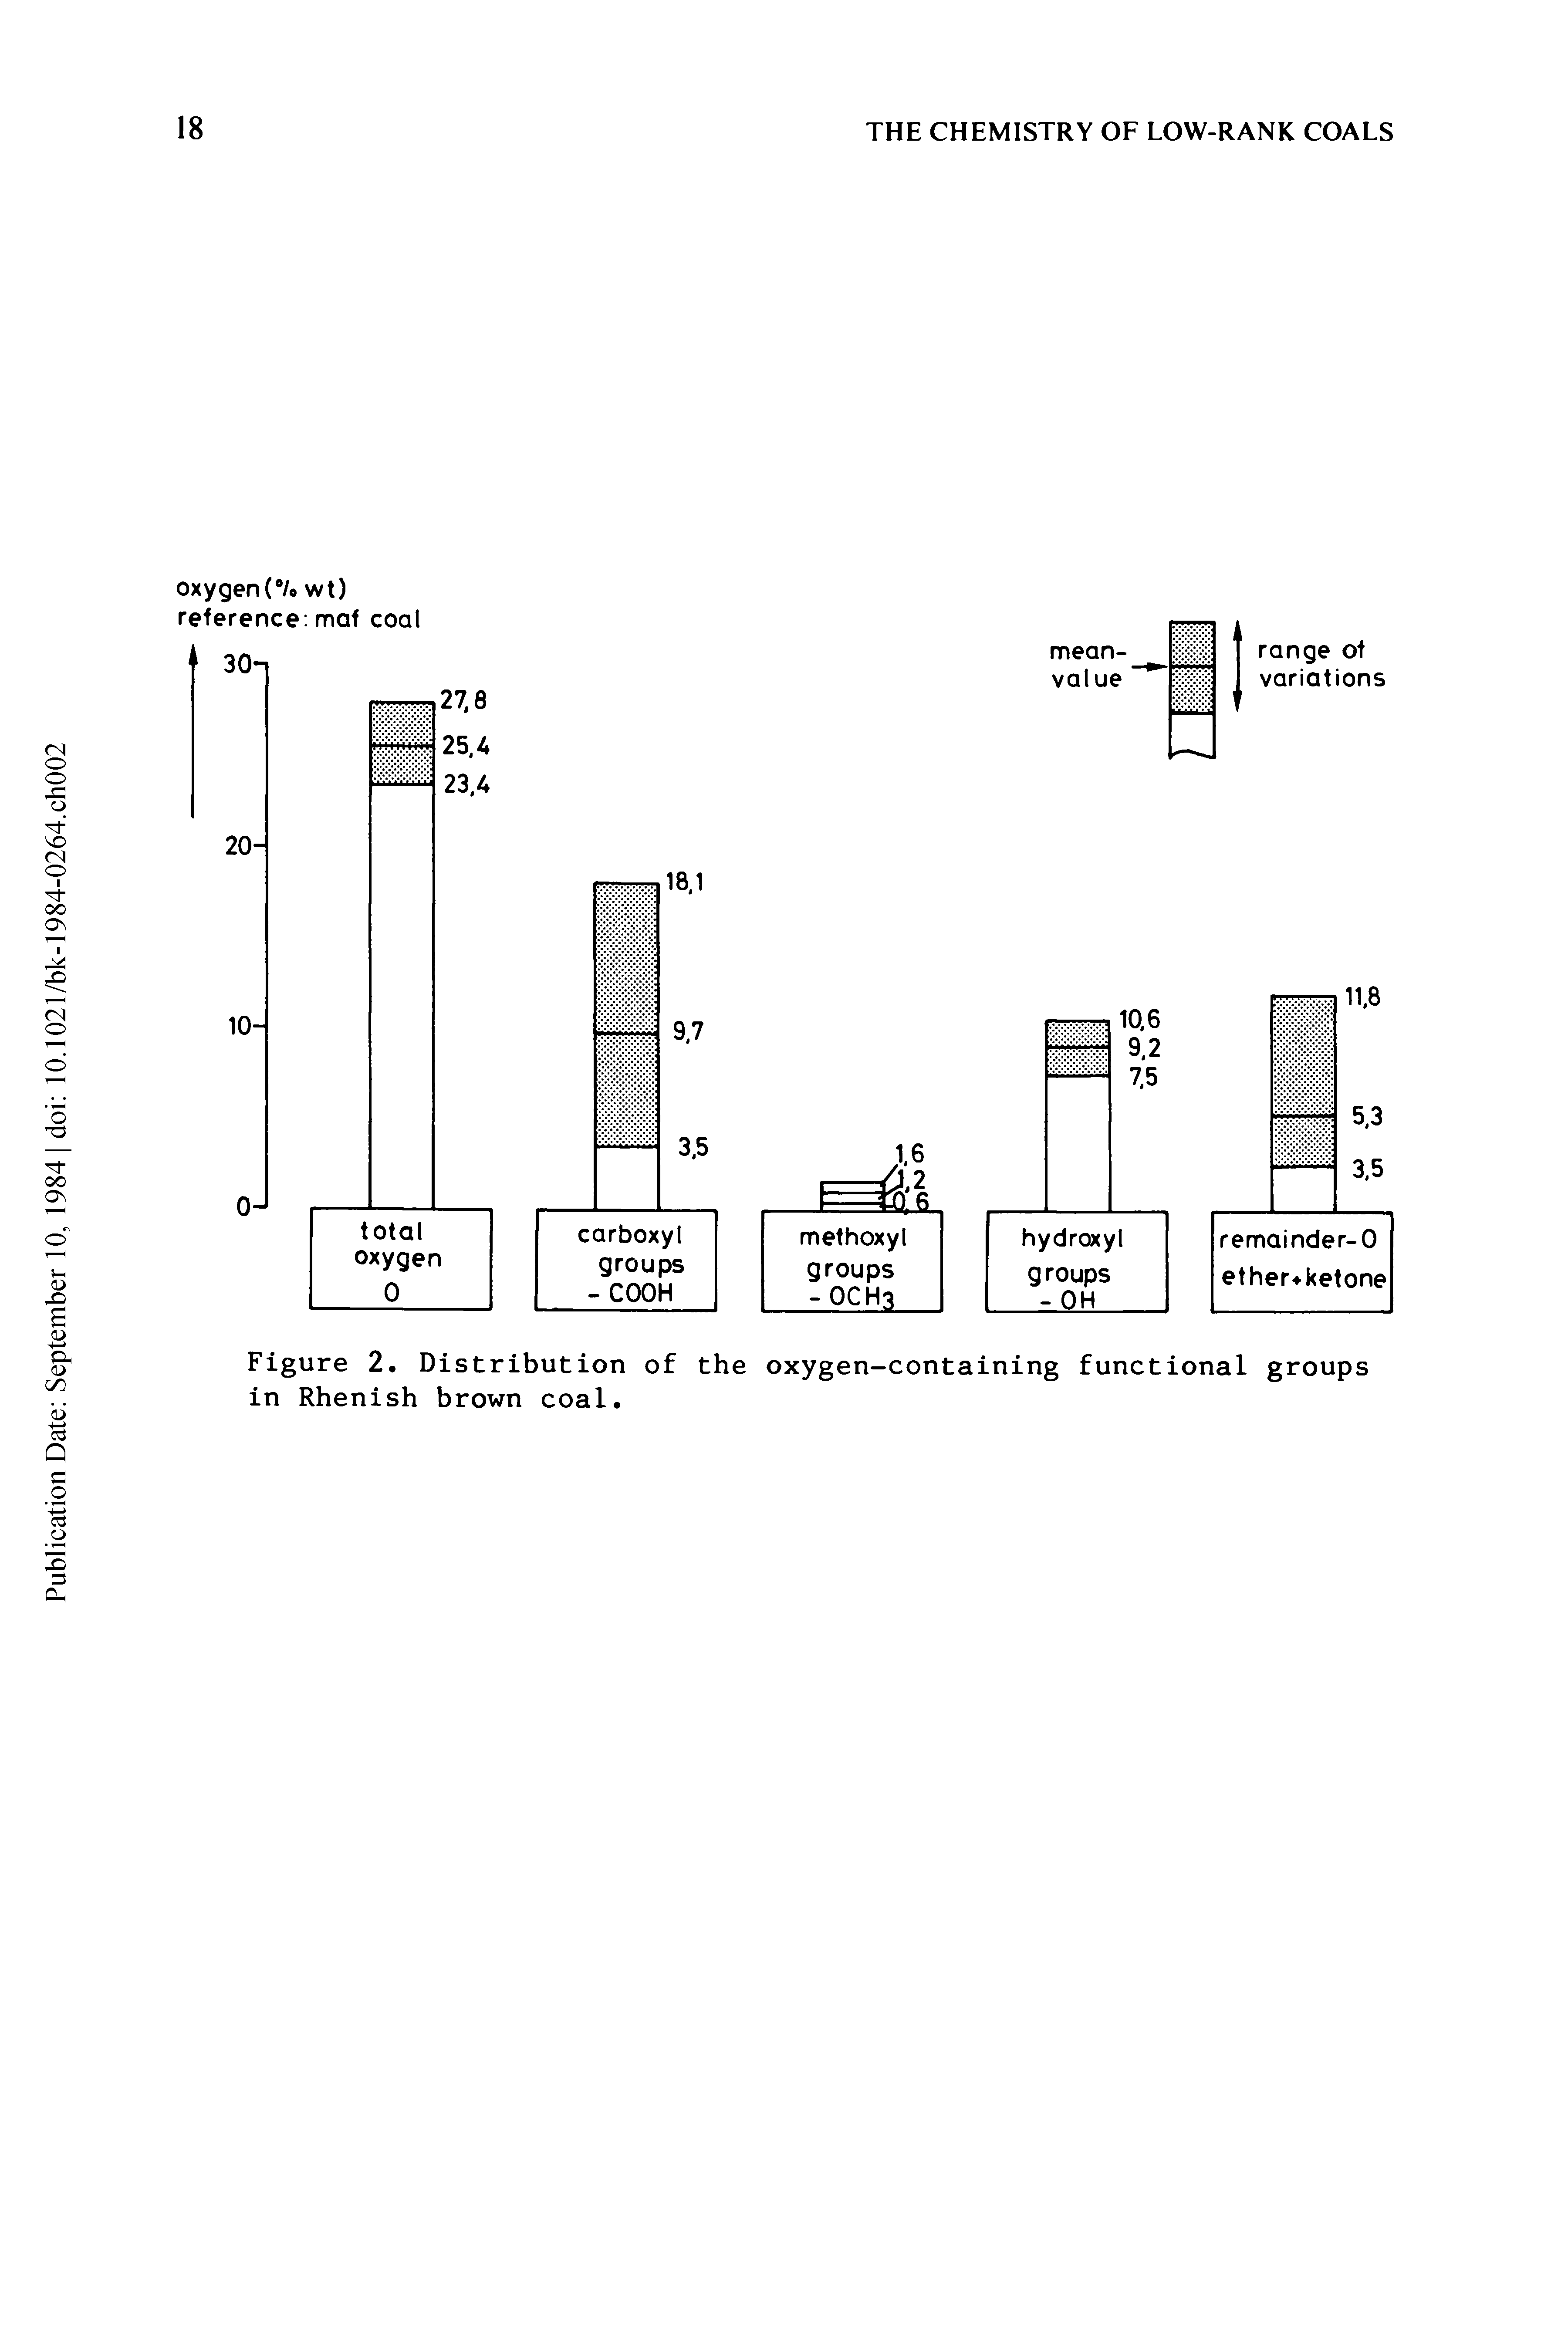 Figure 2. Distribution of the oxygen-containing functional groups in Rhenish brown coal.